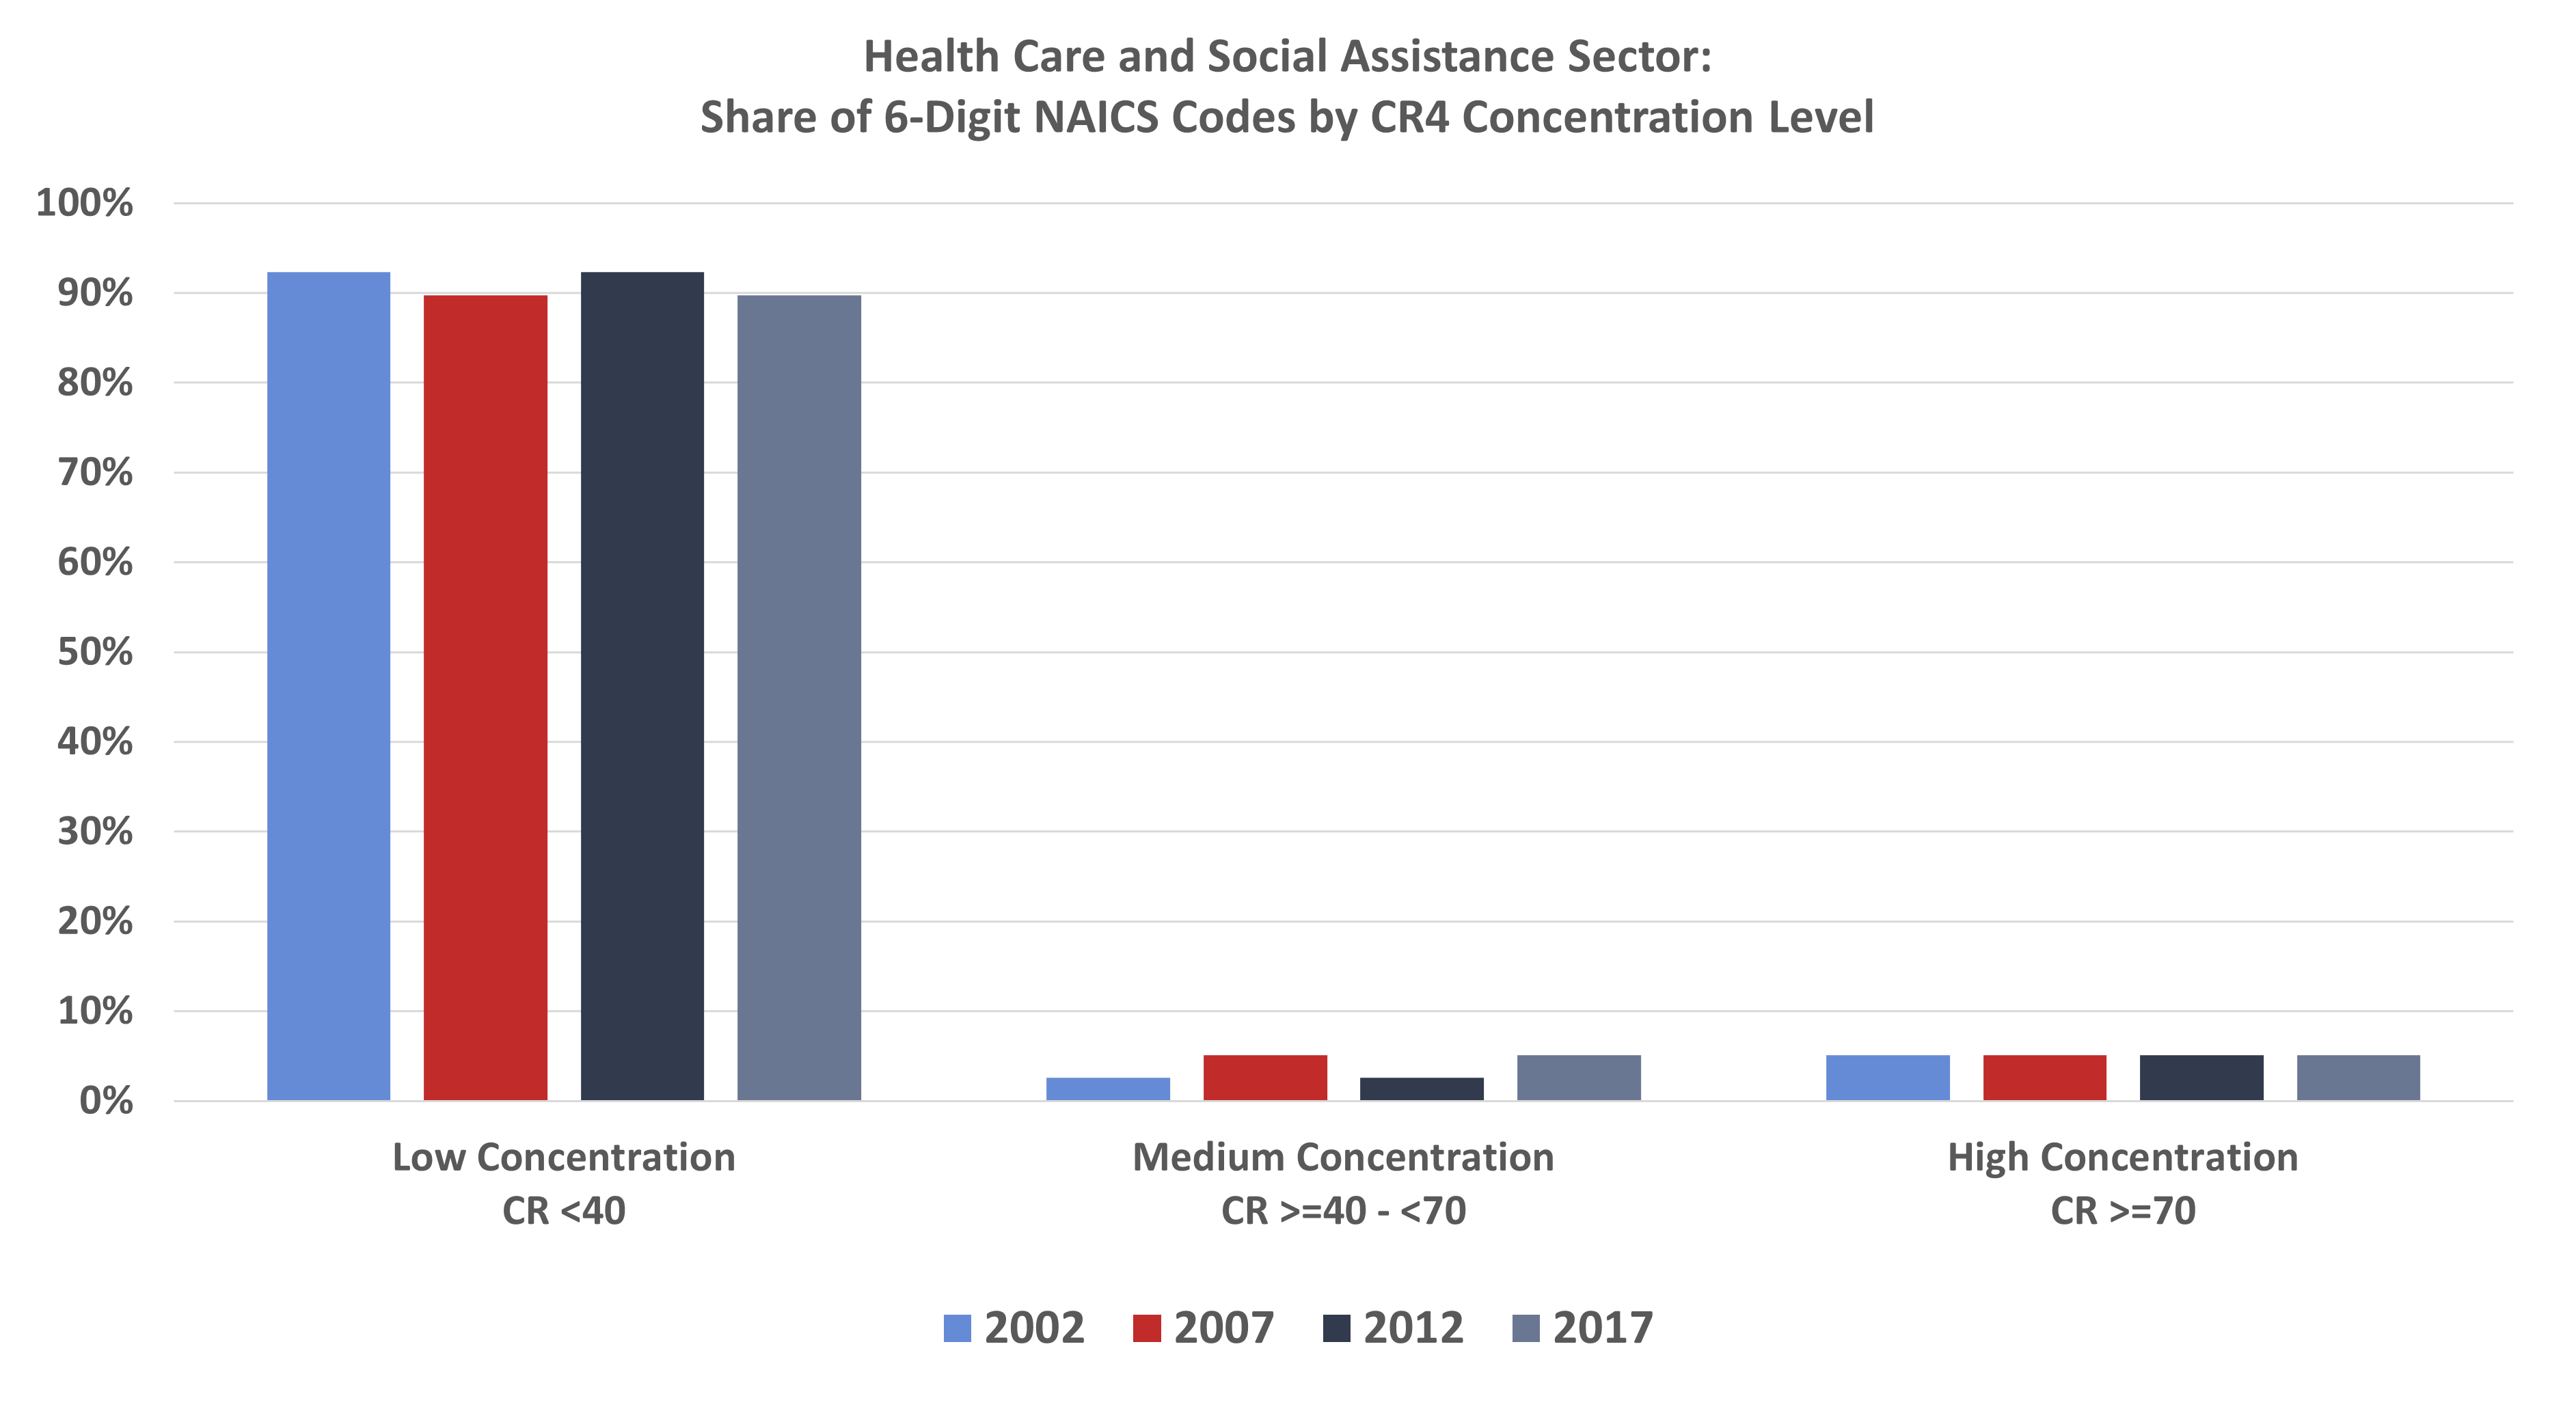 Health Care and Social Assistance Sector: Share of 6-Digit NAICS Codes by CR4 Concentration Level